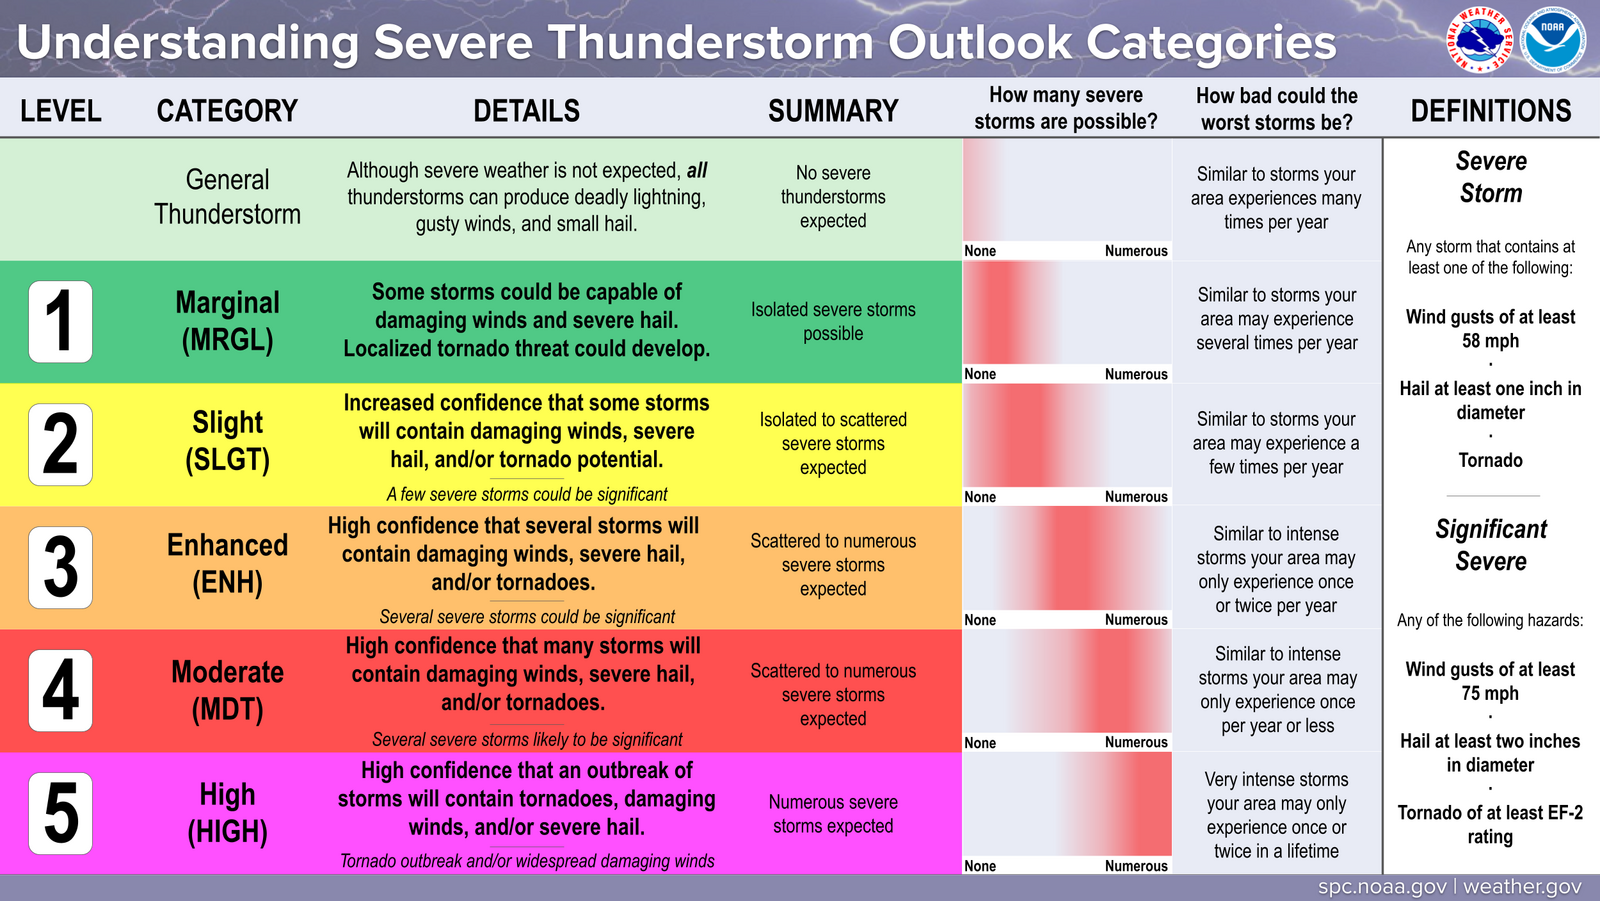 SPC_outlook_final_updated (2).png